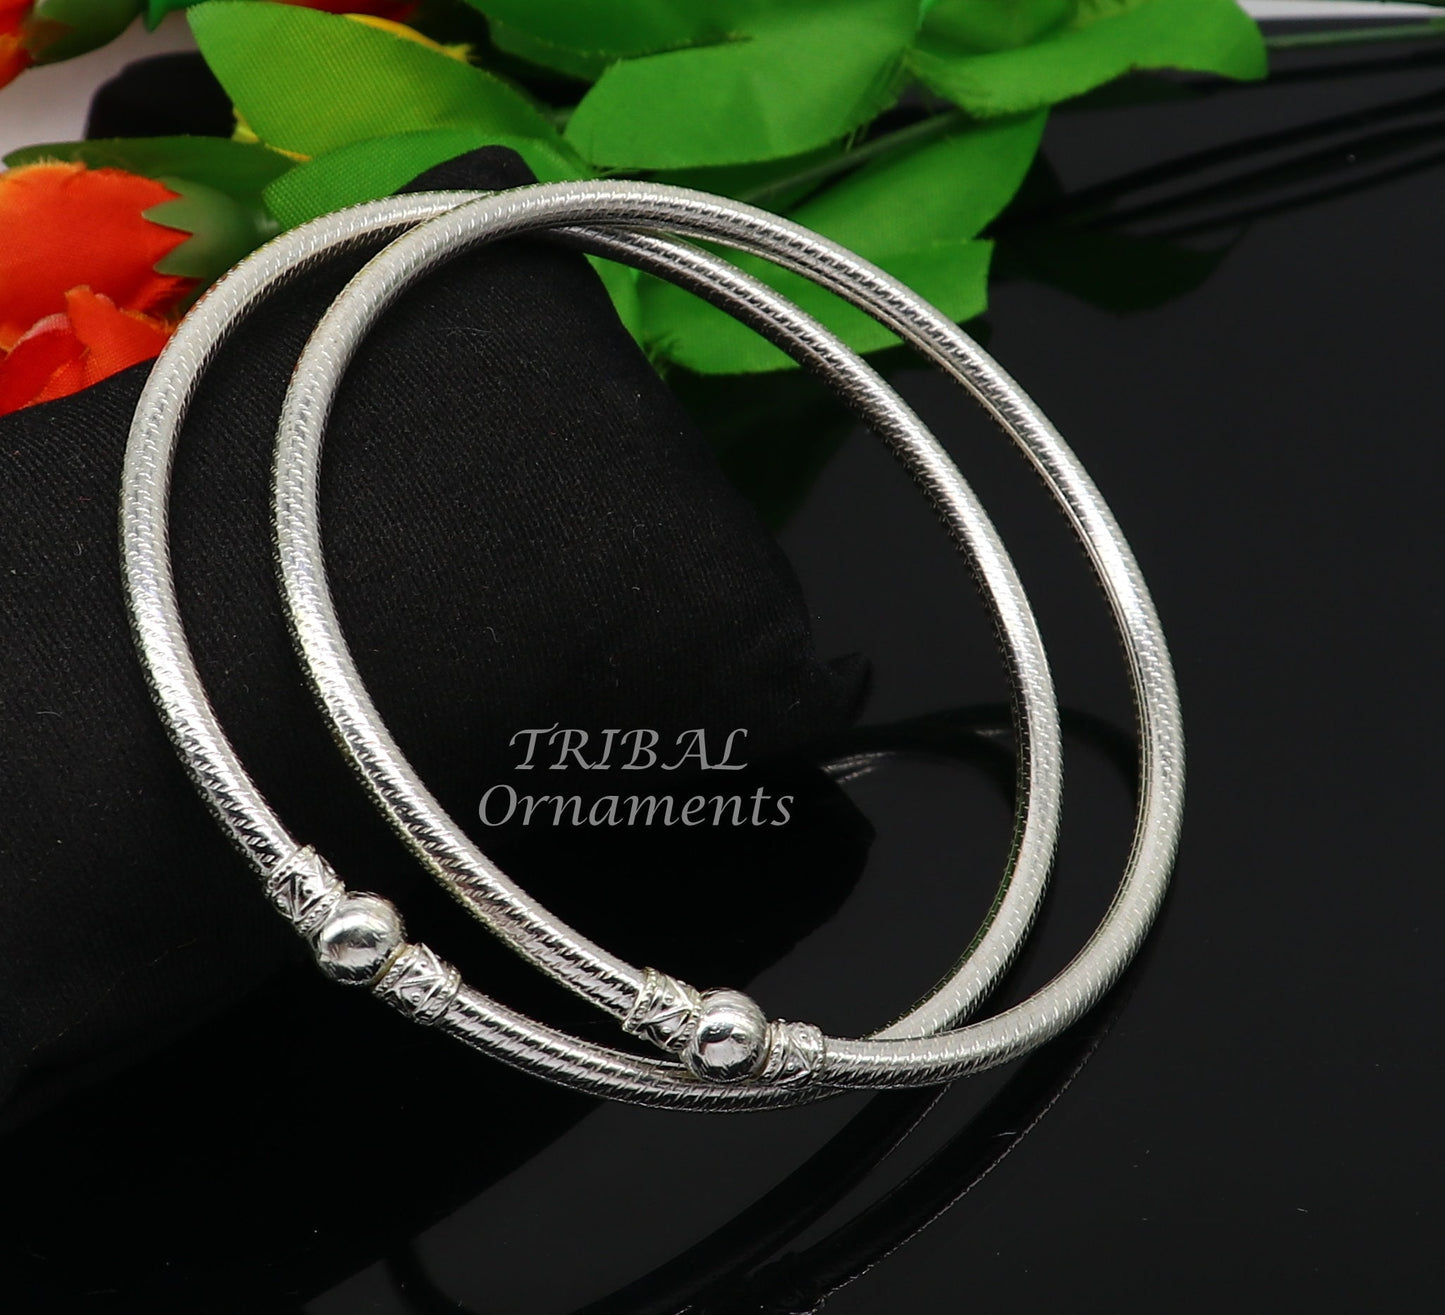 925 sterling silver Vintage design Indian traditional silver women's customized foot kada anklet kada hollow bracelet tribal jewelry nsfk84 - TRIBAL ORNAMENTS